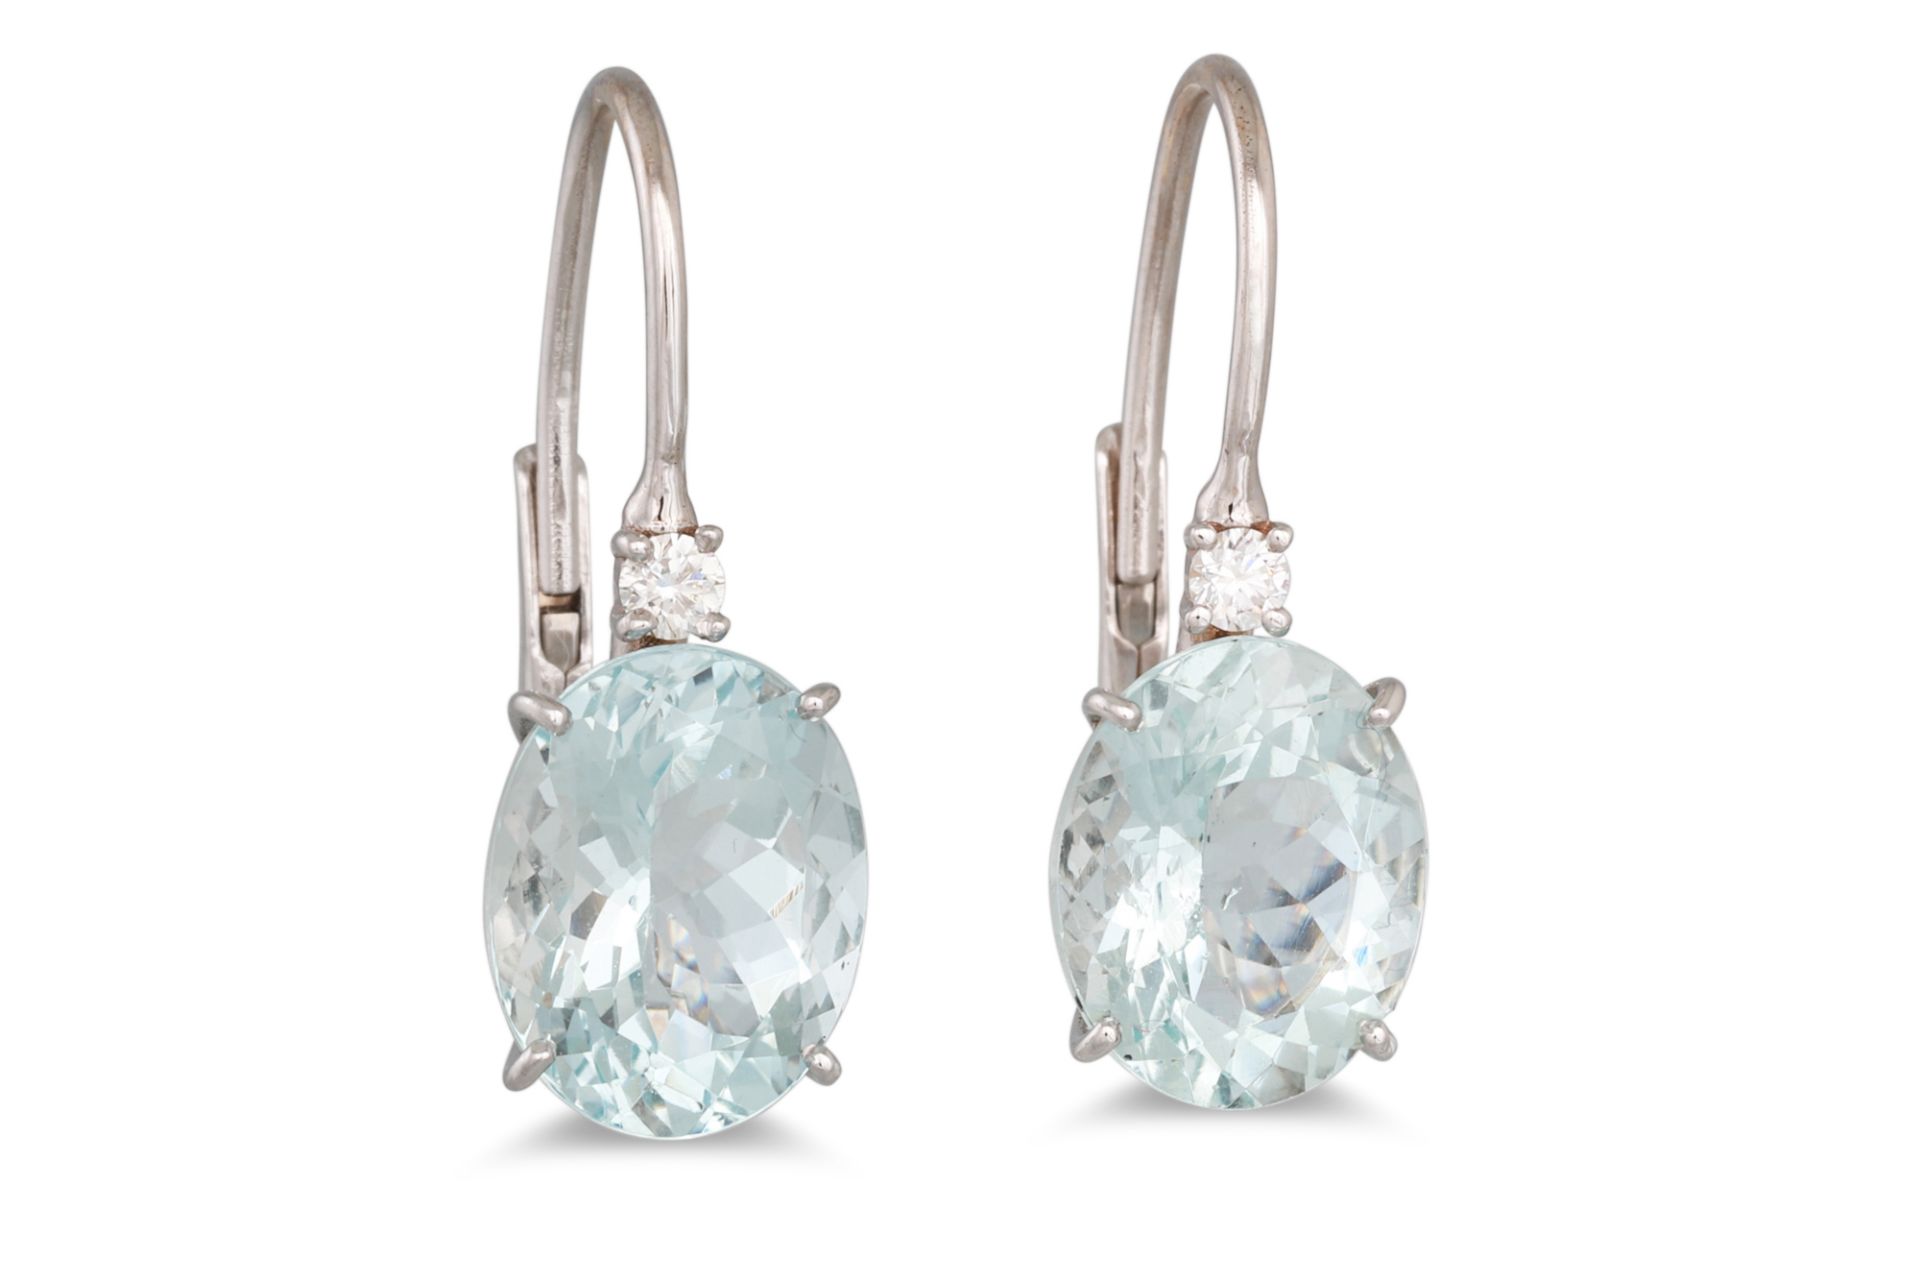 A PAIR OF AQUAMARINE AND DIAMOND EARRINGS, the oval aquamarines with brilliant cut diamonds, in 18ct